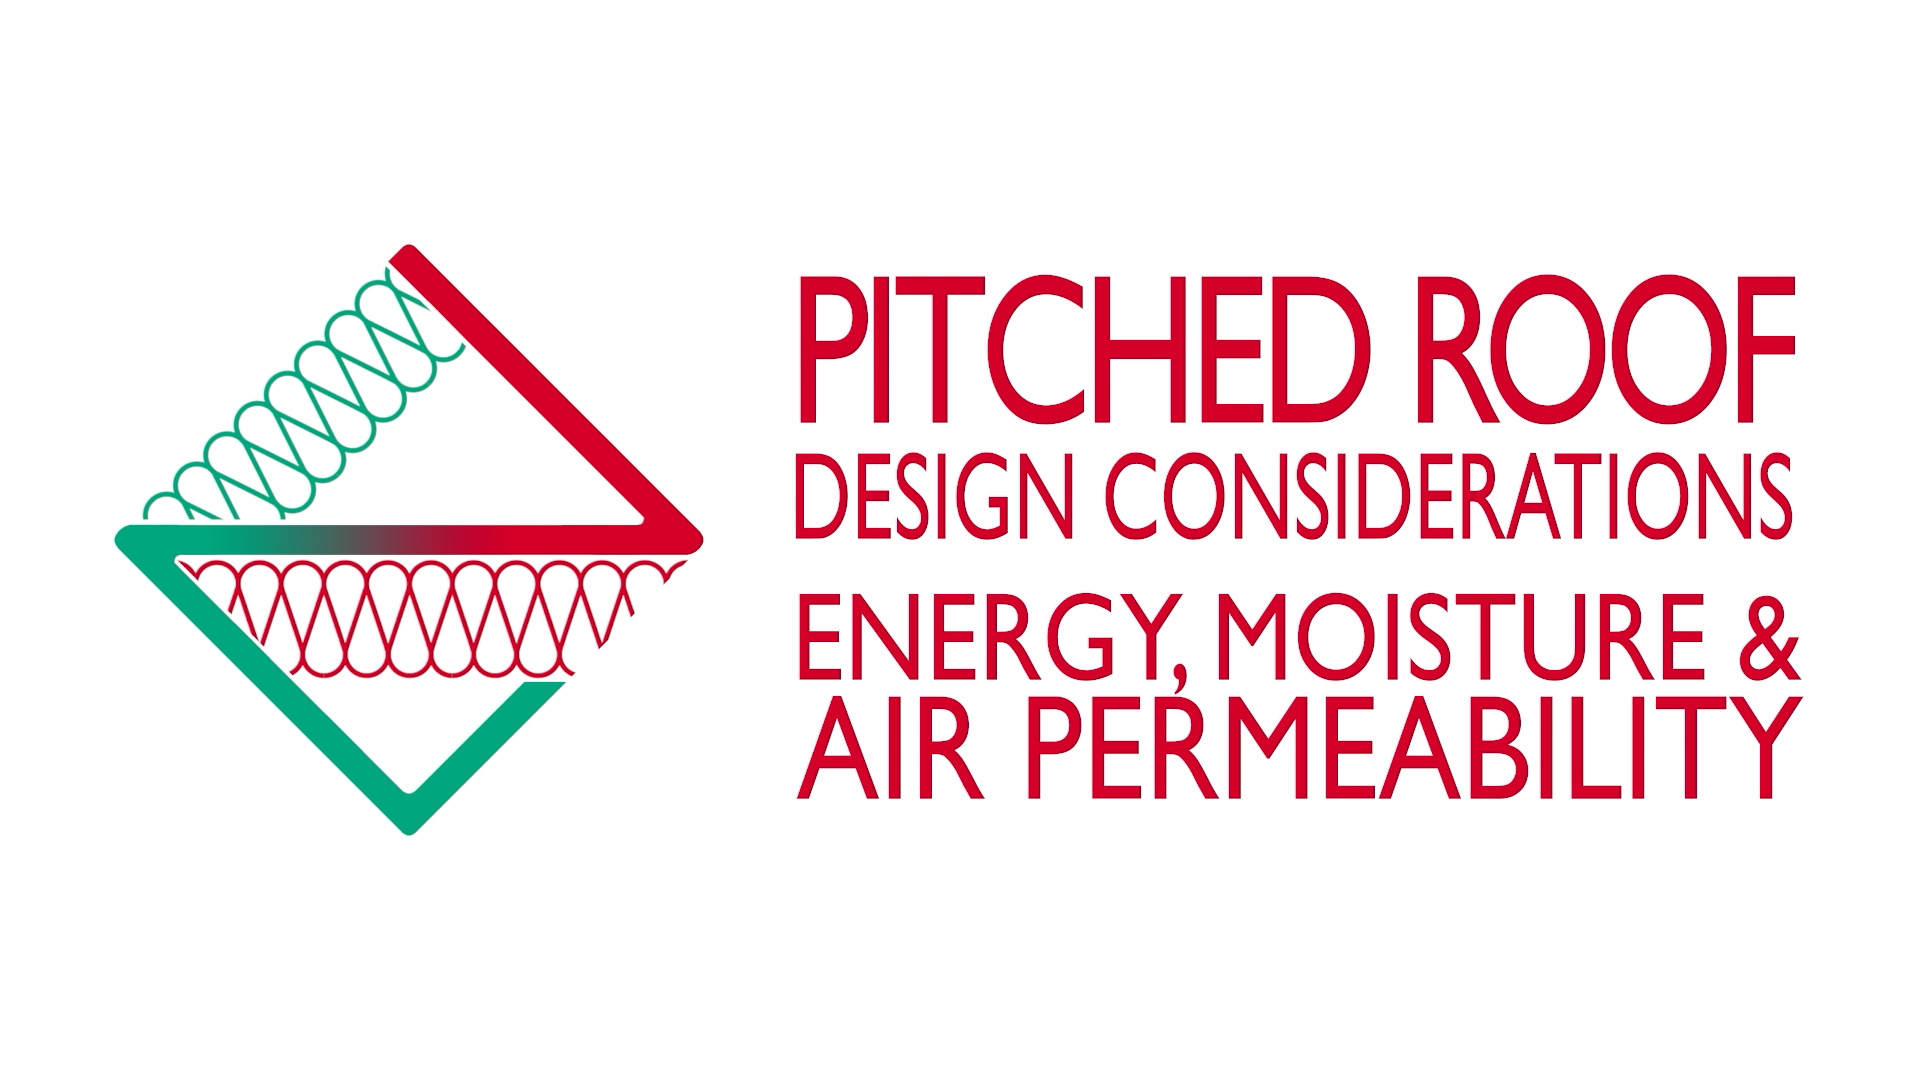 There are many factors that must be considered when designing a pitched roof. This webinar covers the energy, moisture and air permeability aspects that will impact pitched roof performance.